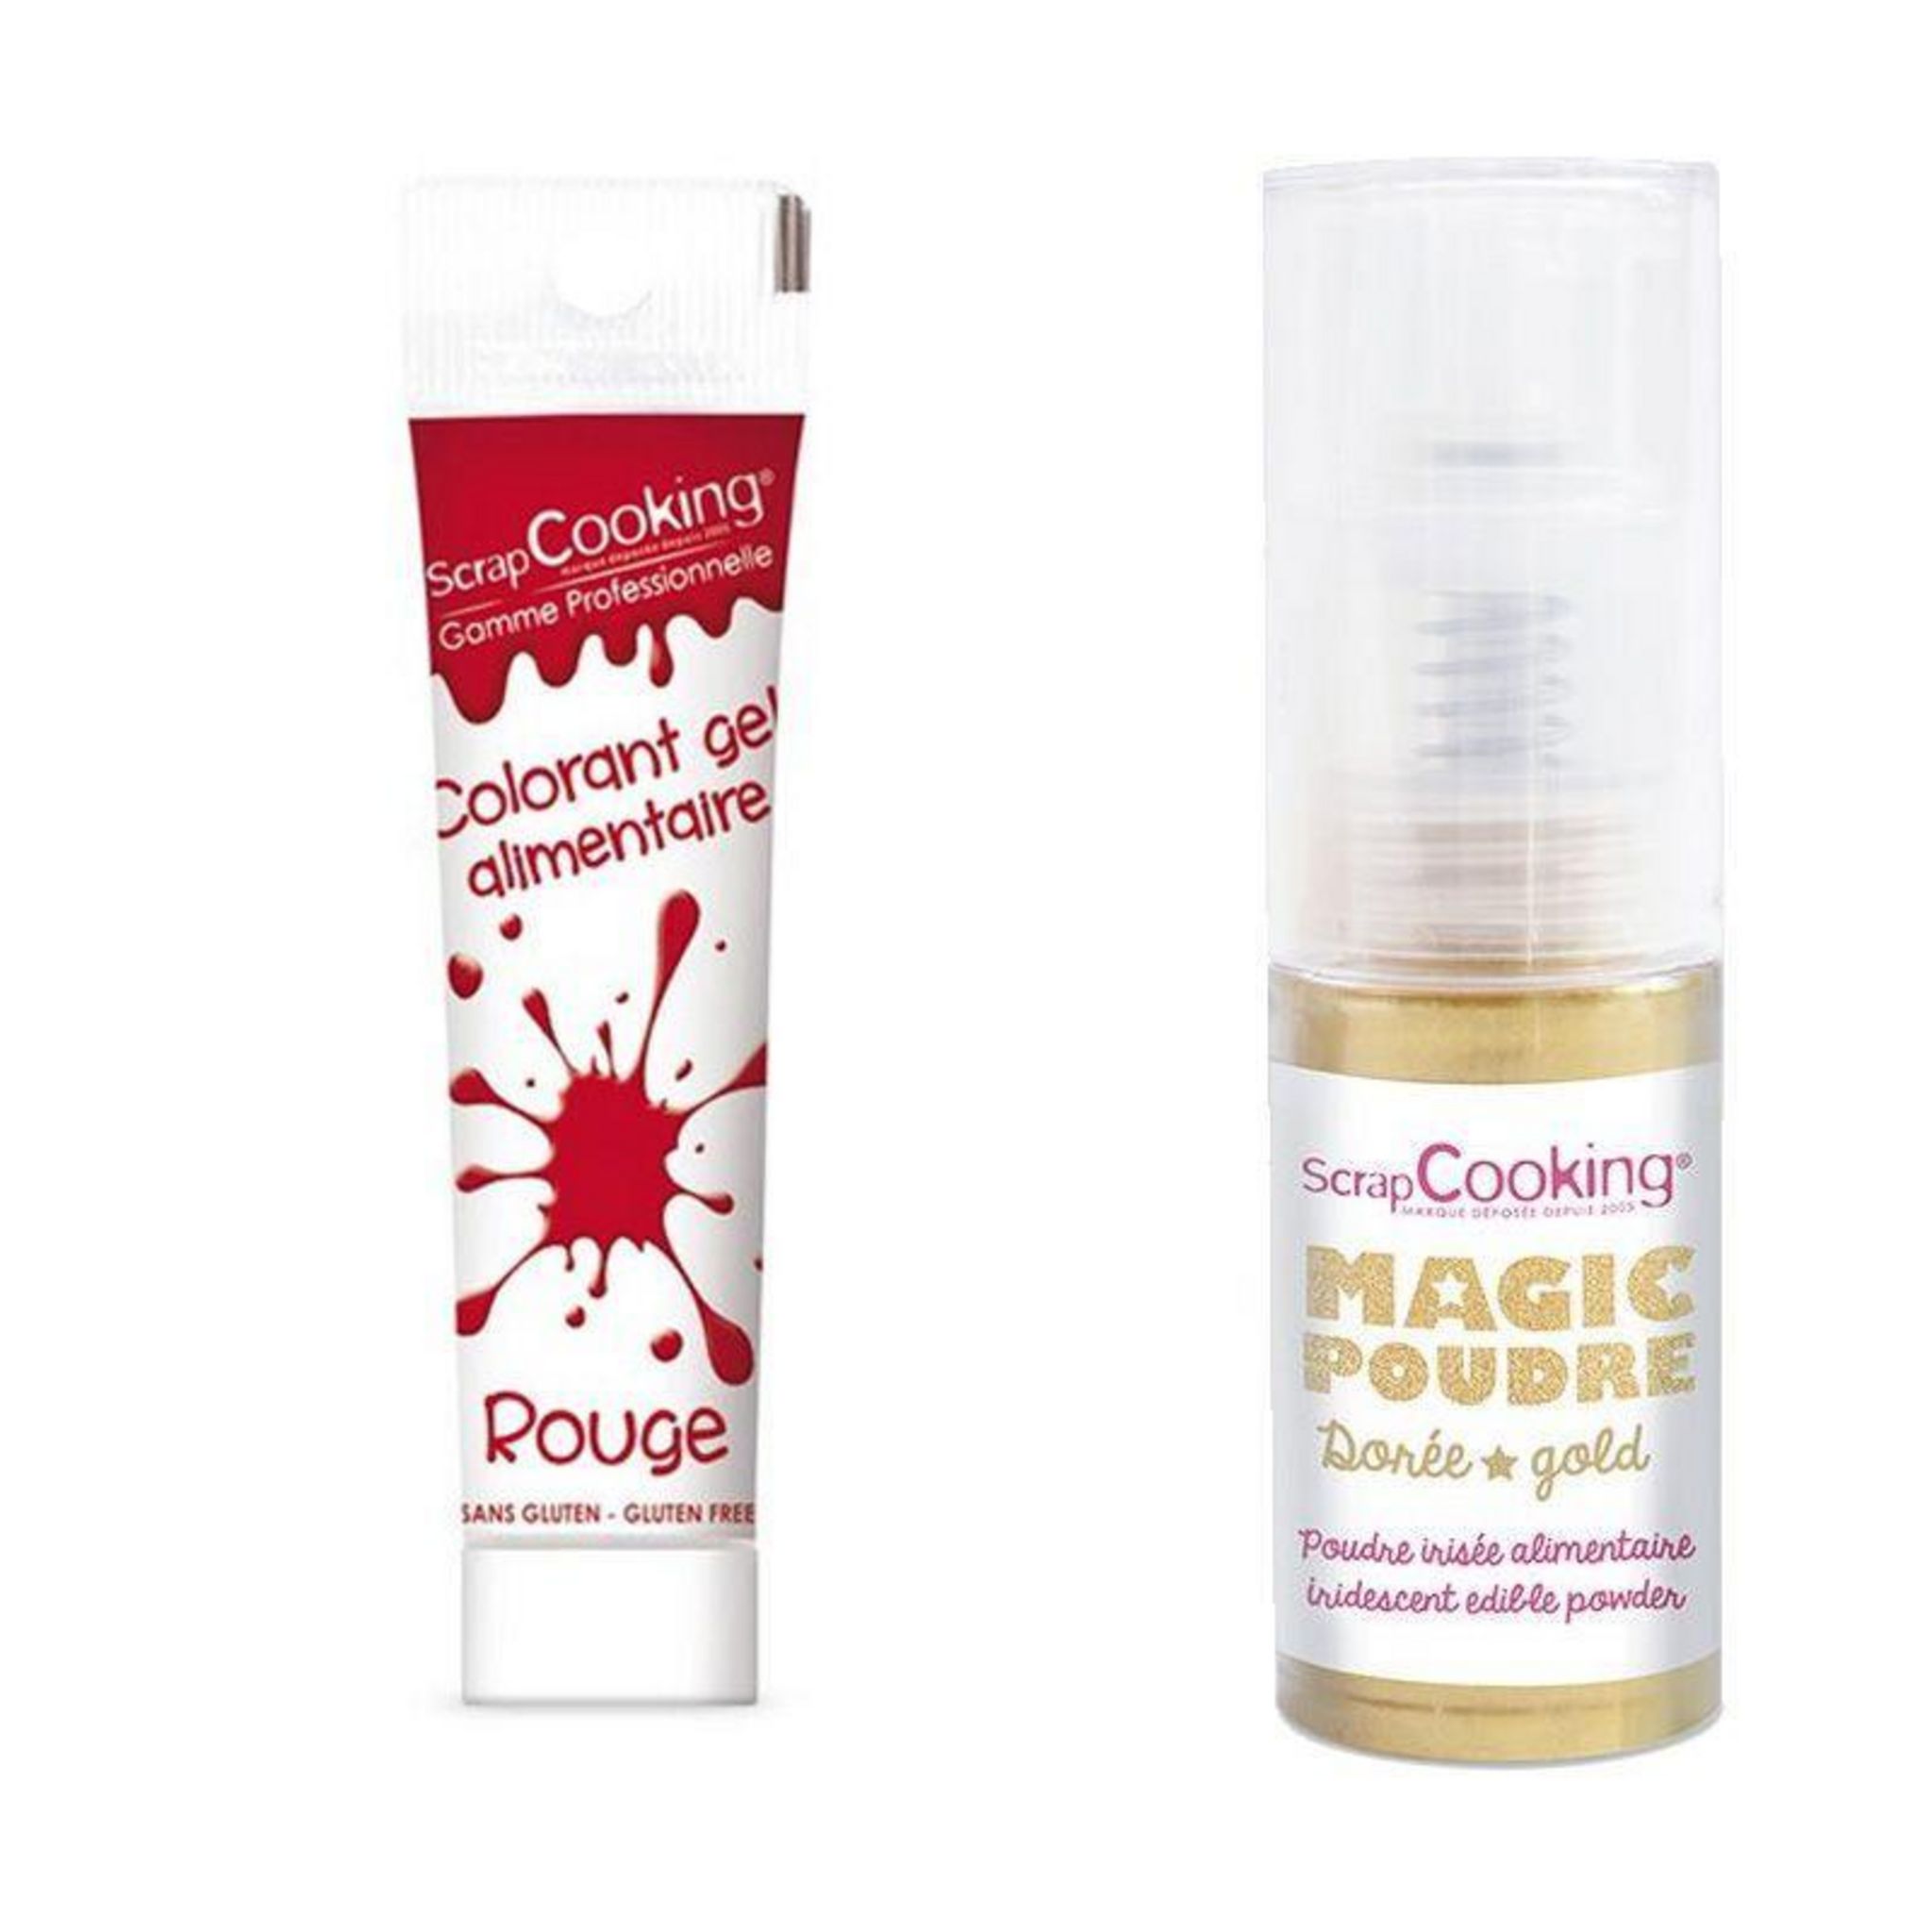 SCRAPCOOKING Gel colorant alimentaire rouge 20 g + Poudre